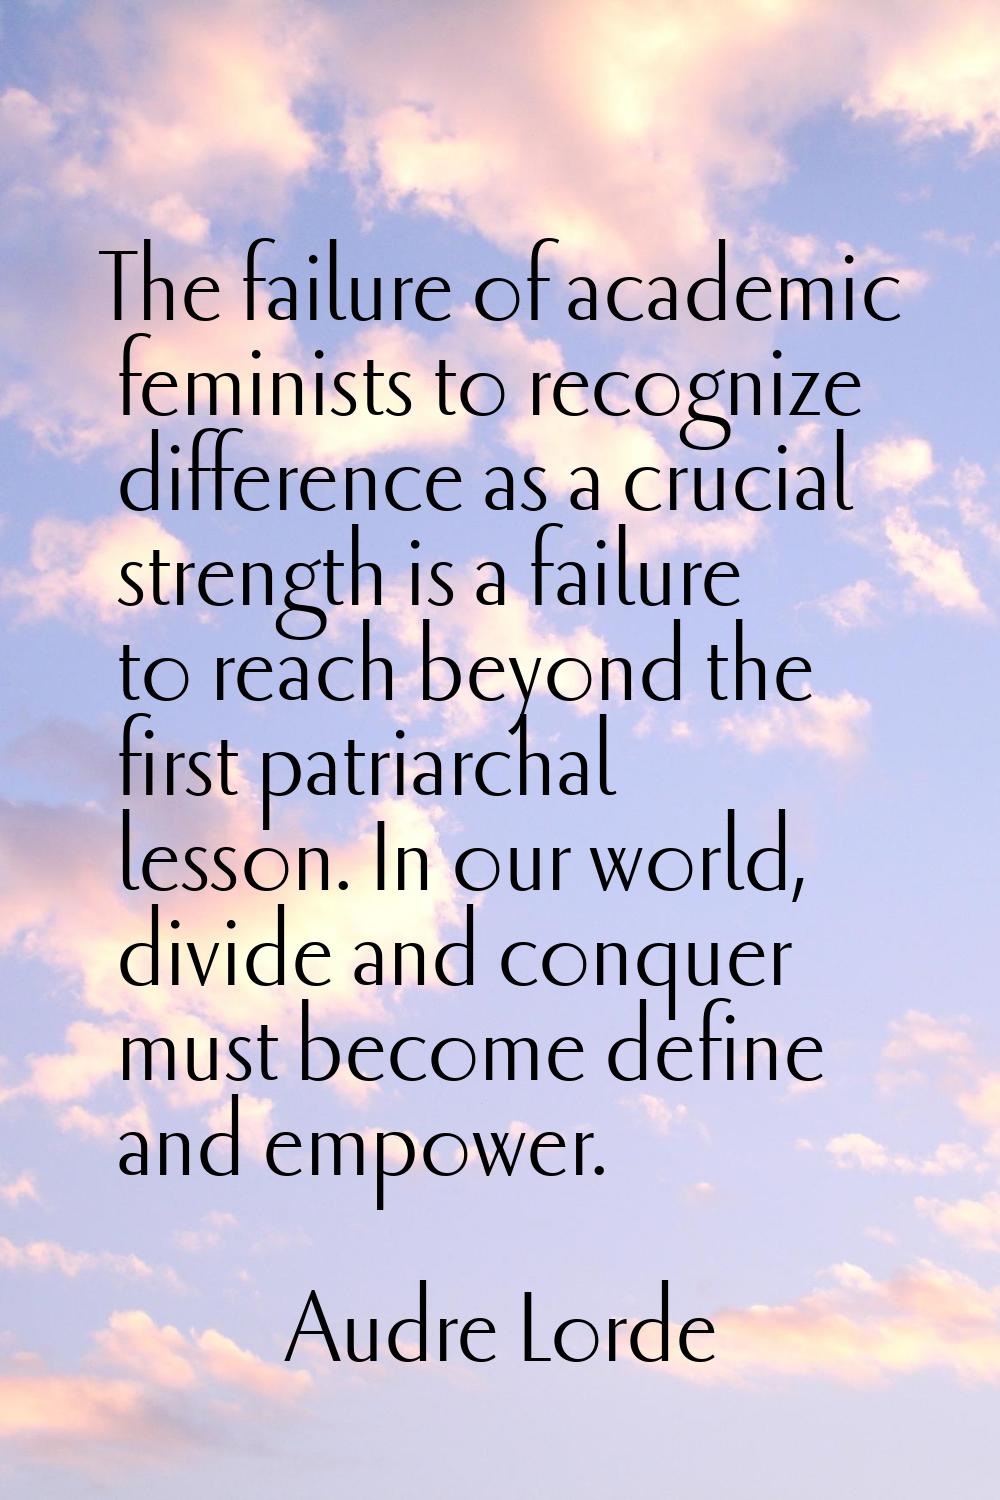 The failure of academic feminists to recognize difference as a crucial strength is a failure to rea